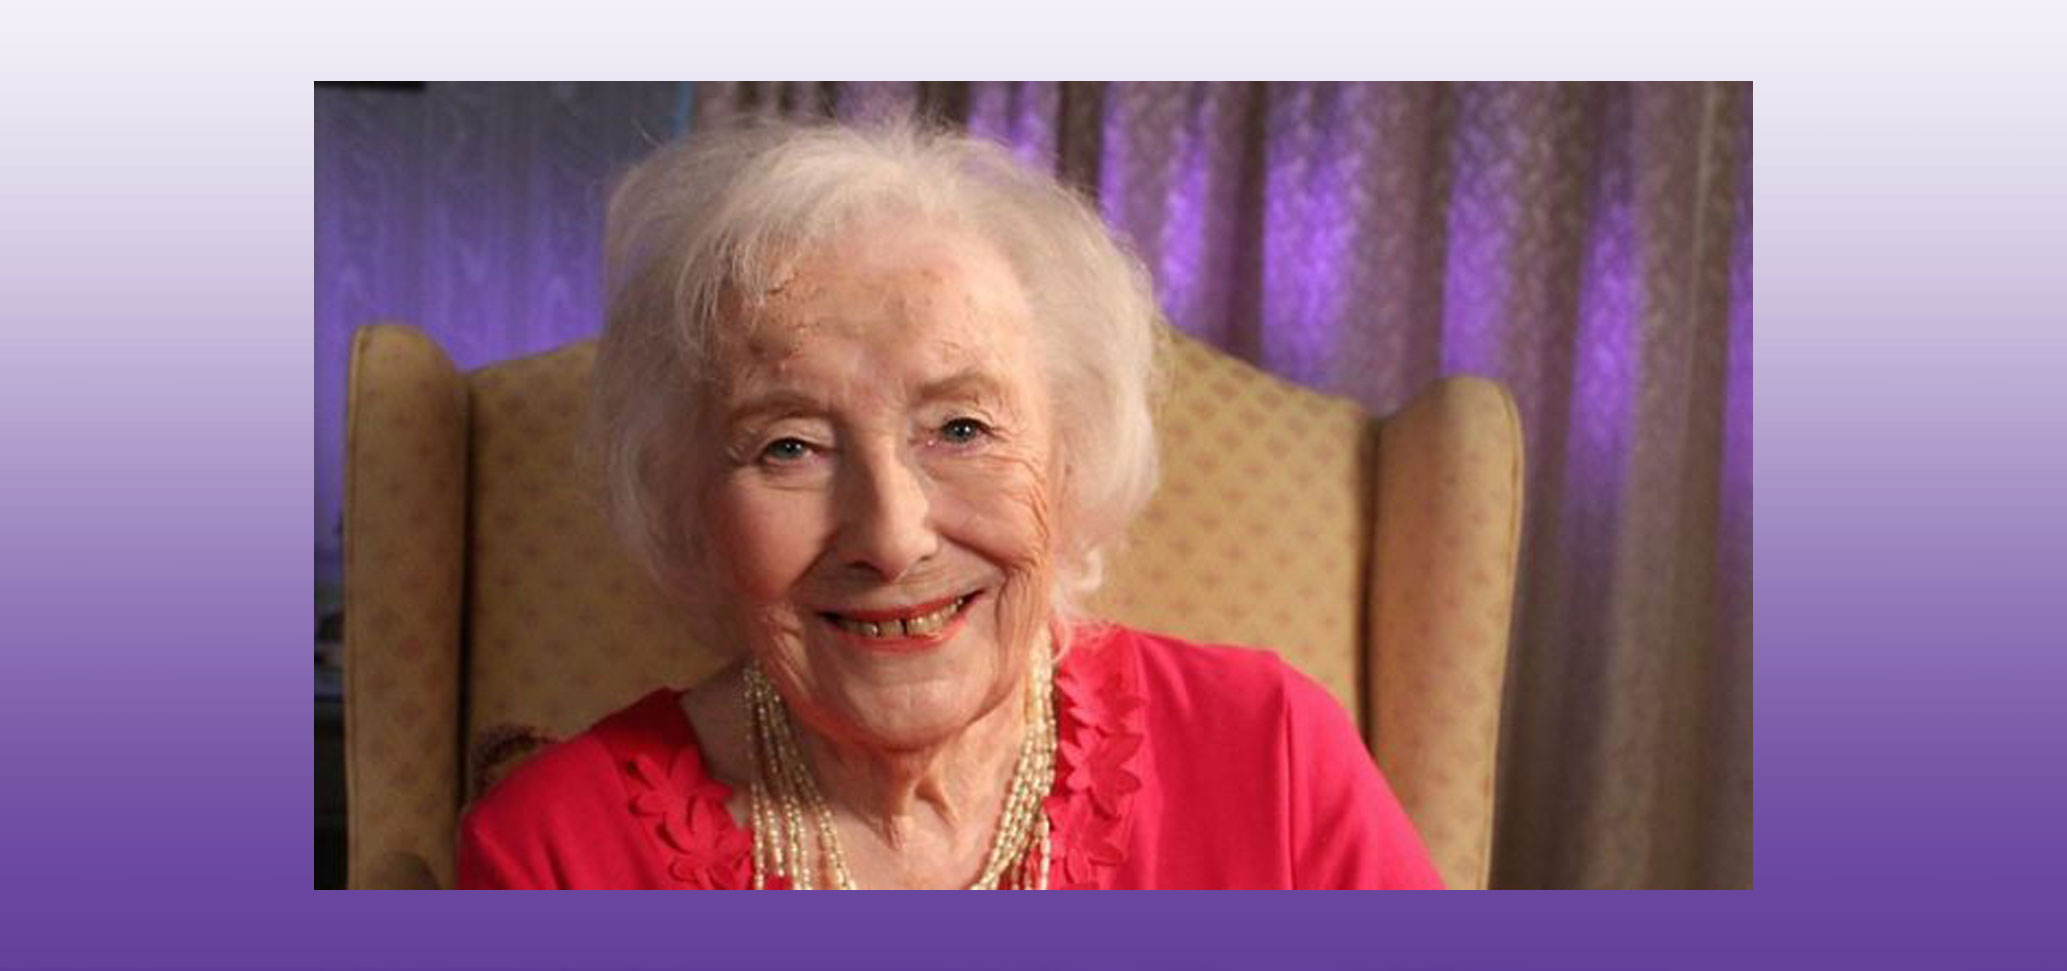 Dame Vera Lynn gives encouragement in hard times